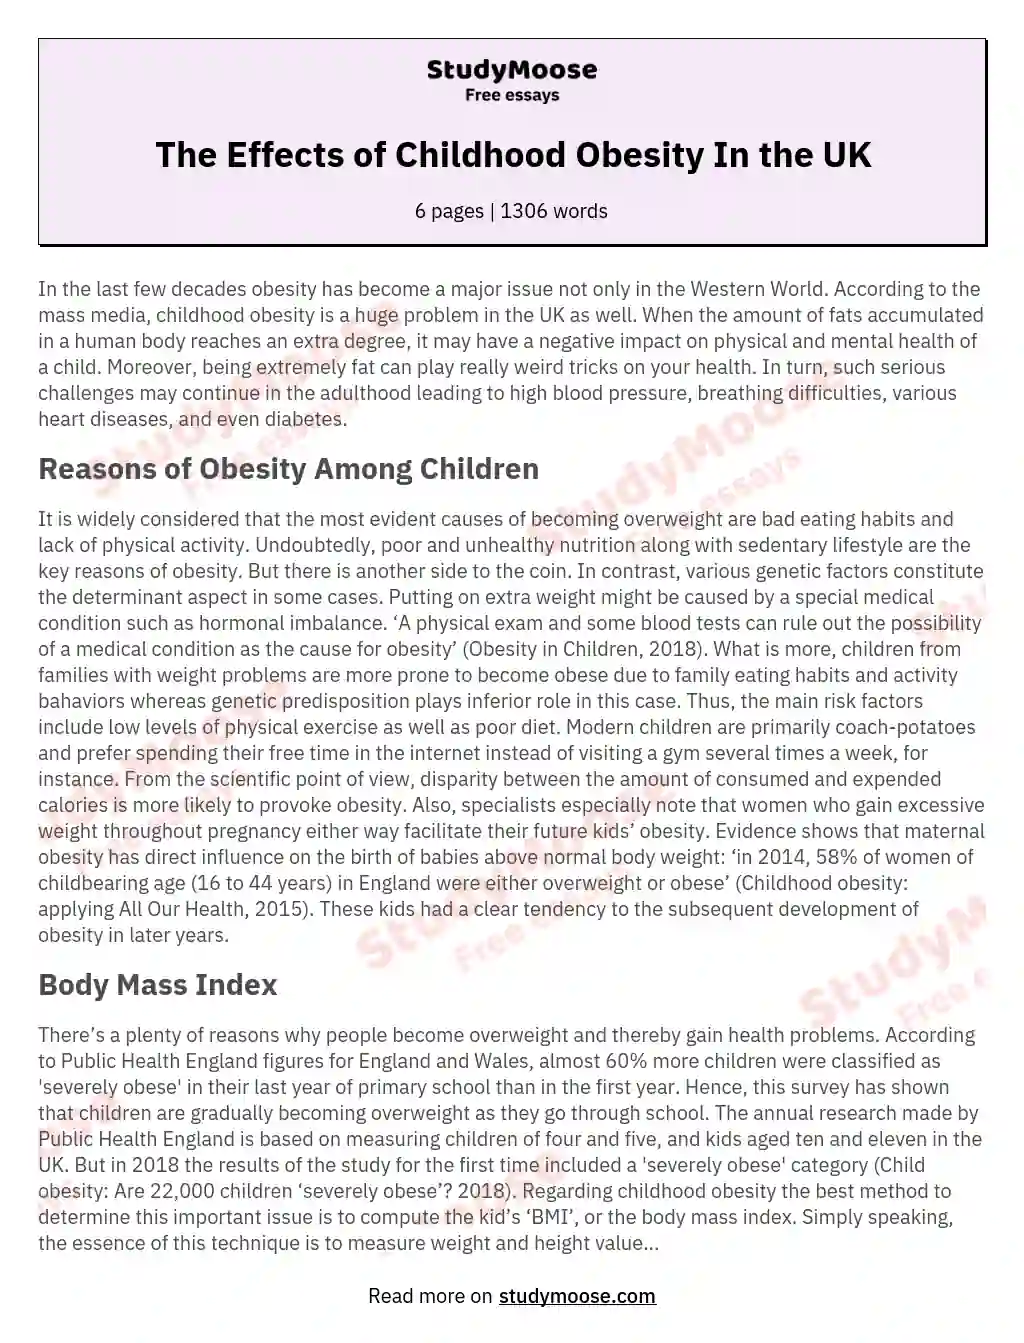 The Effects of Childhood Obesity In the UK